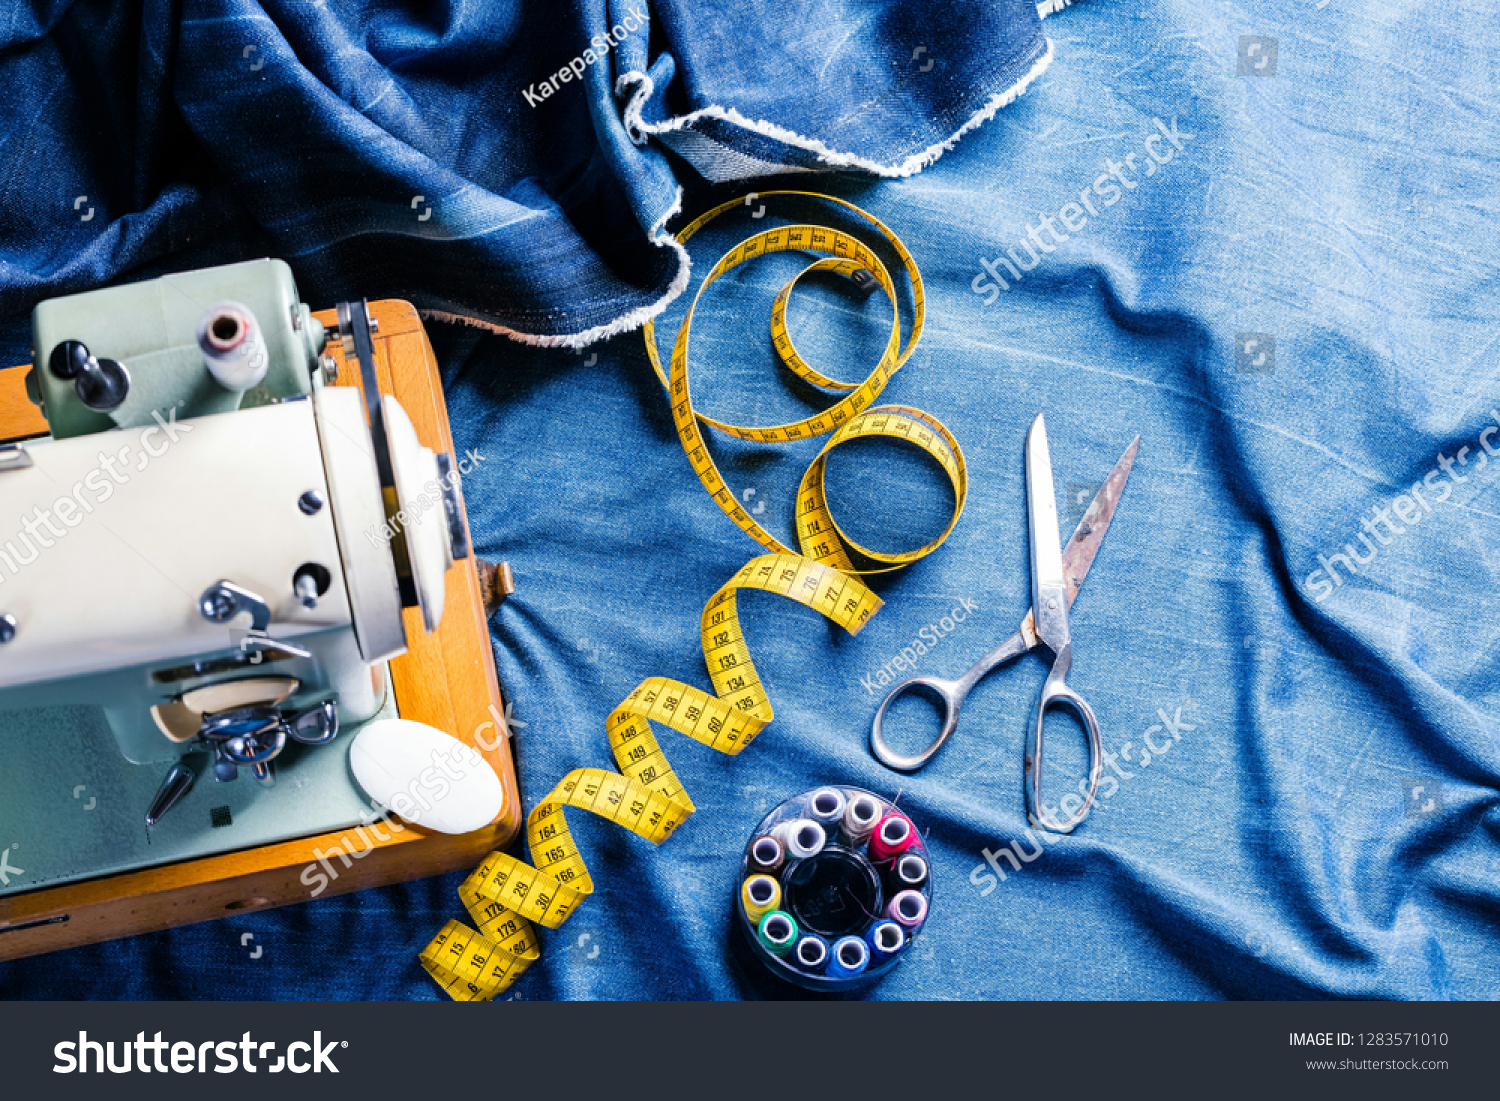 sewing indigo denim jeans with sewing machine, garment industrial concept #1283571010